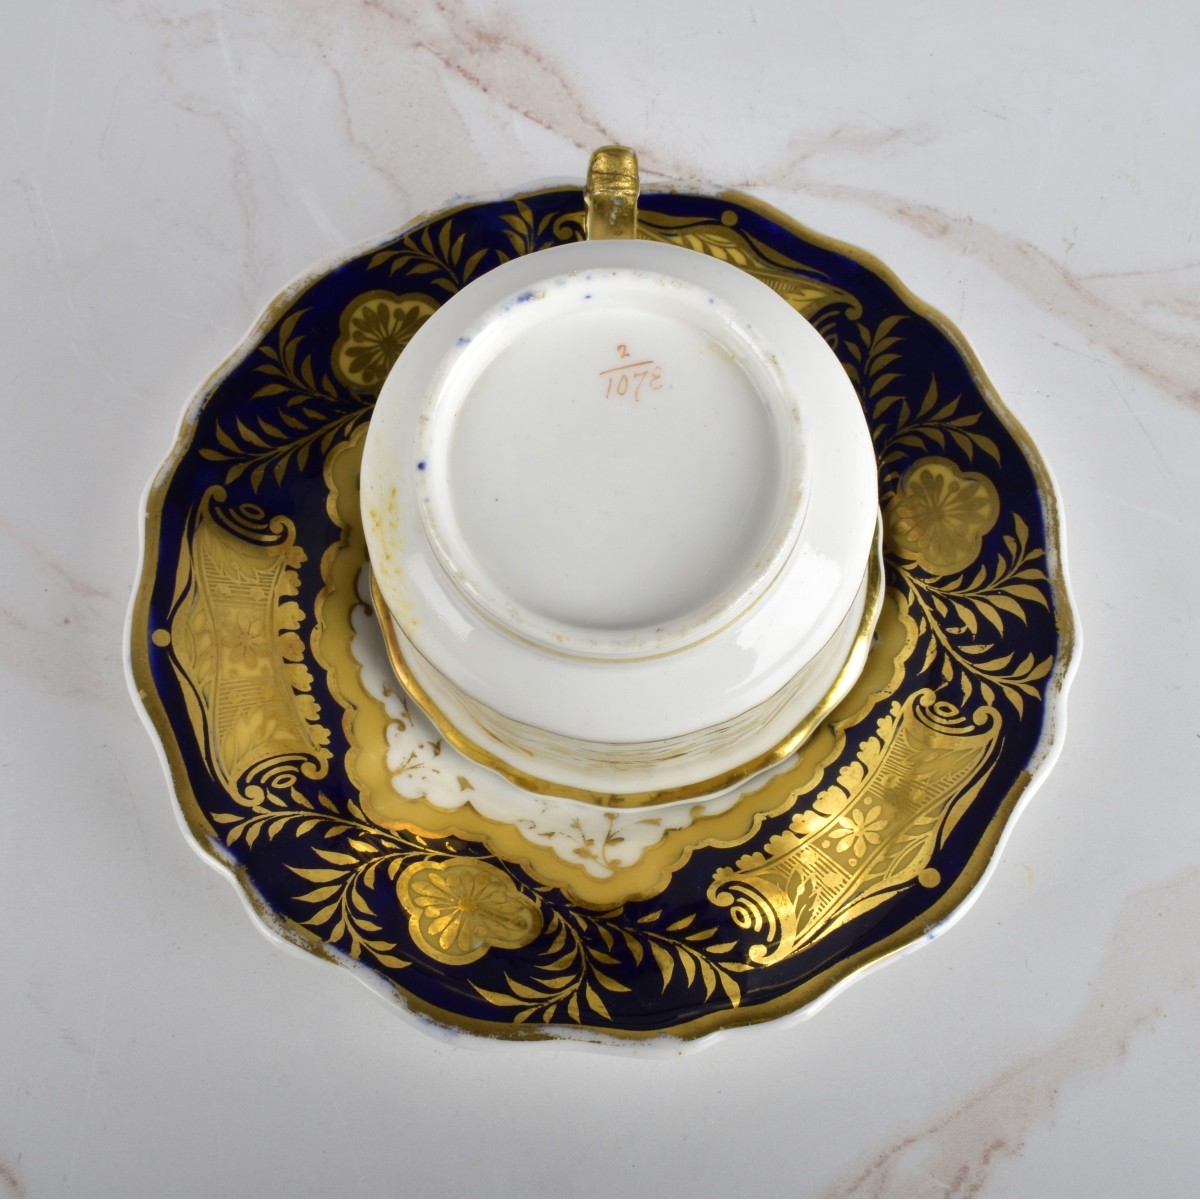 Antique French Porcelain Cups and Saucers